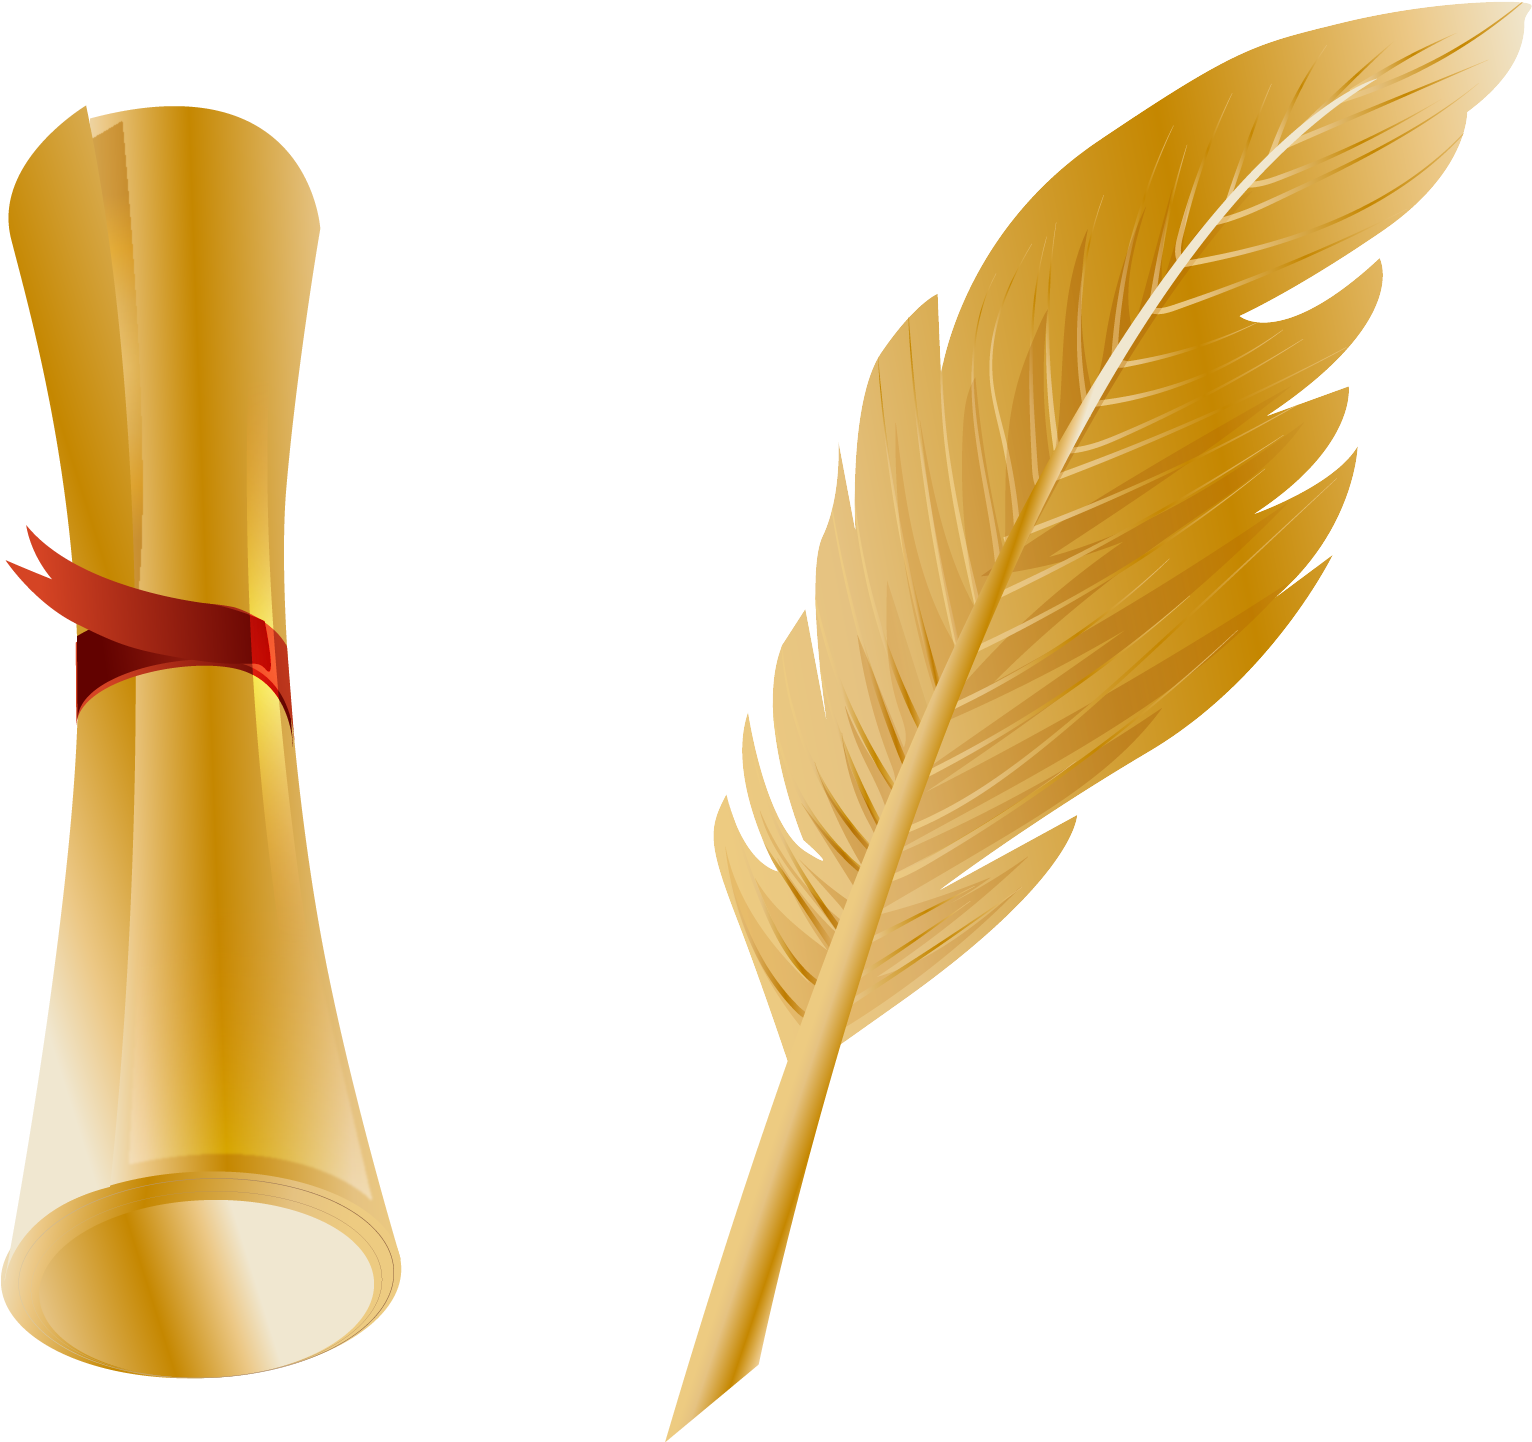 Paper Quill Pen Feather - Quill Pen Png (1547x1462)